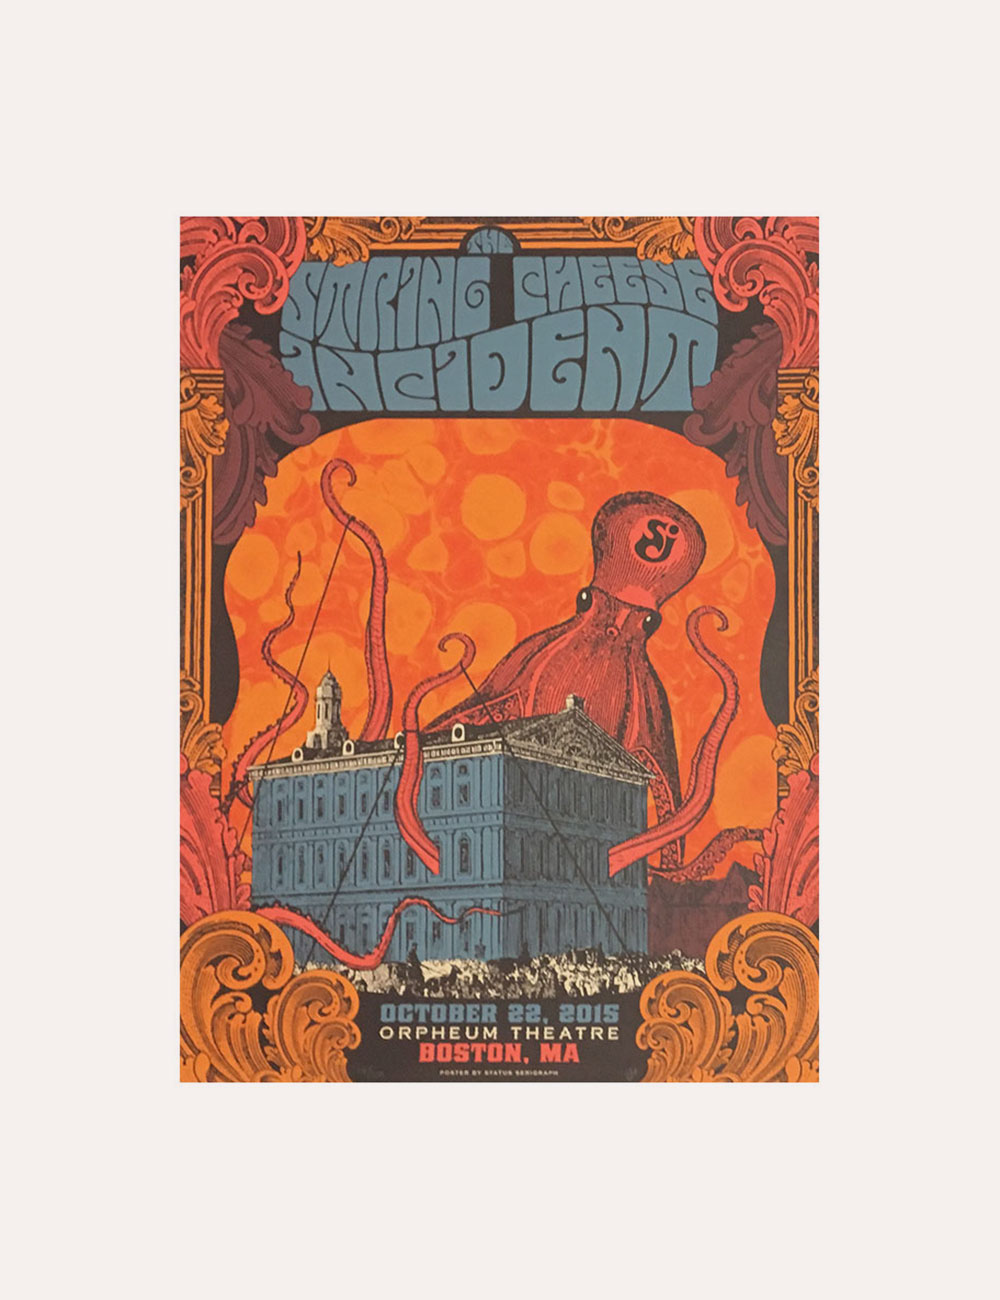 The String Cheese Incident - Merch - Gig Poster - 2015 Orpheum Theatre Boston MA Poster